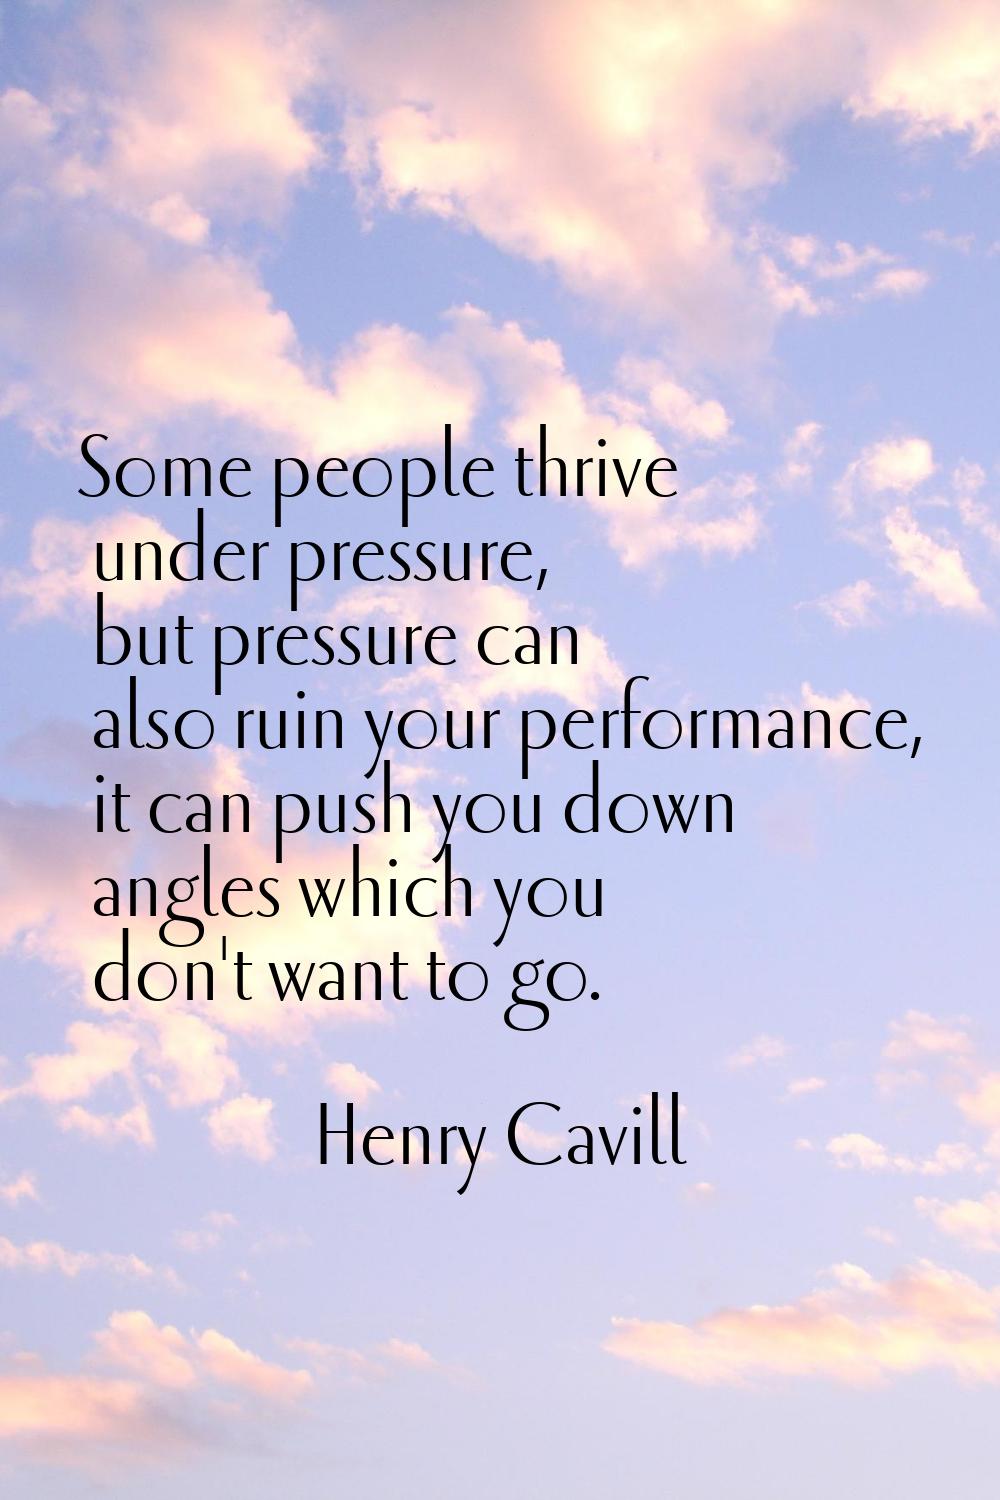 Some people thrive under pressure, but pressure can also ruin your performance, it can push you dow